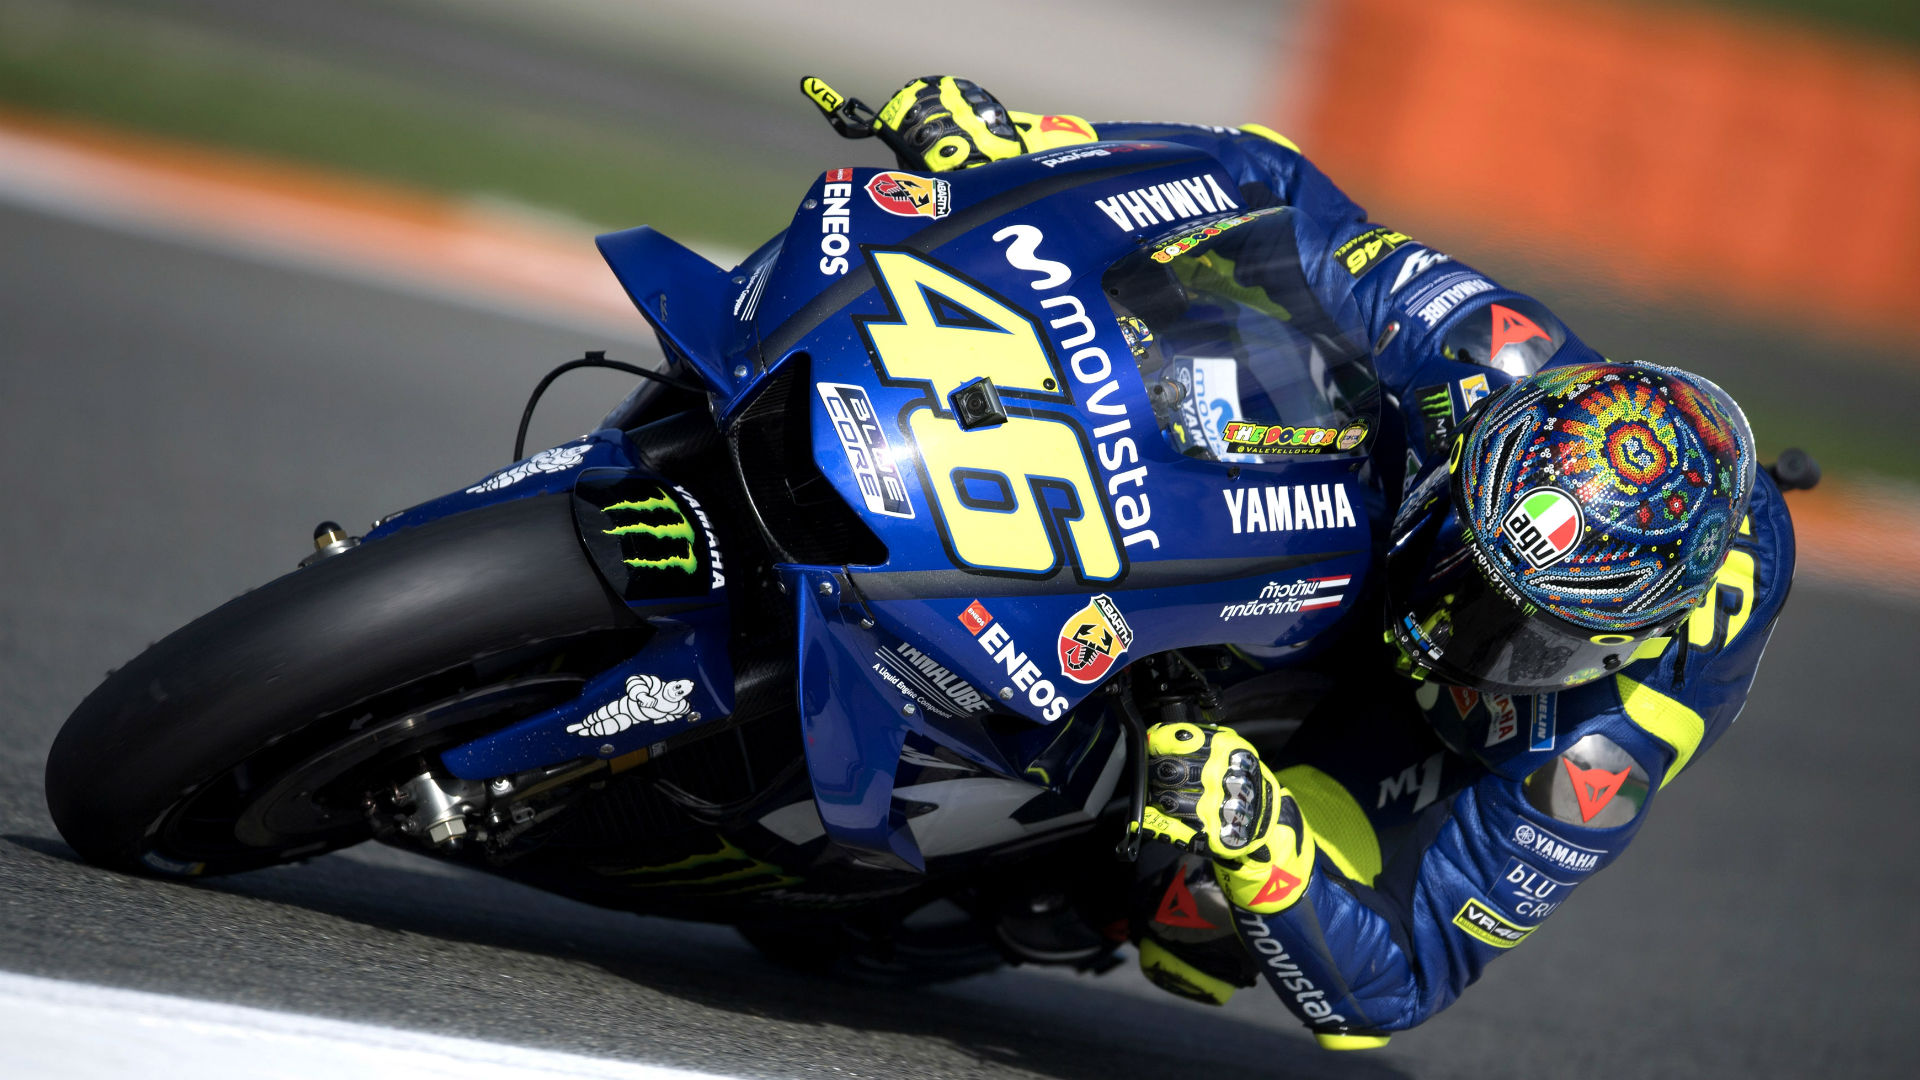 Yamaha have a lot of work to do for 2019